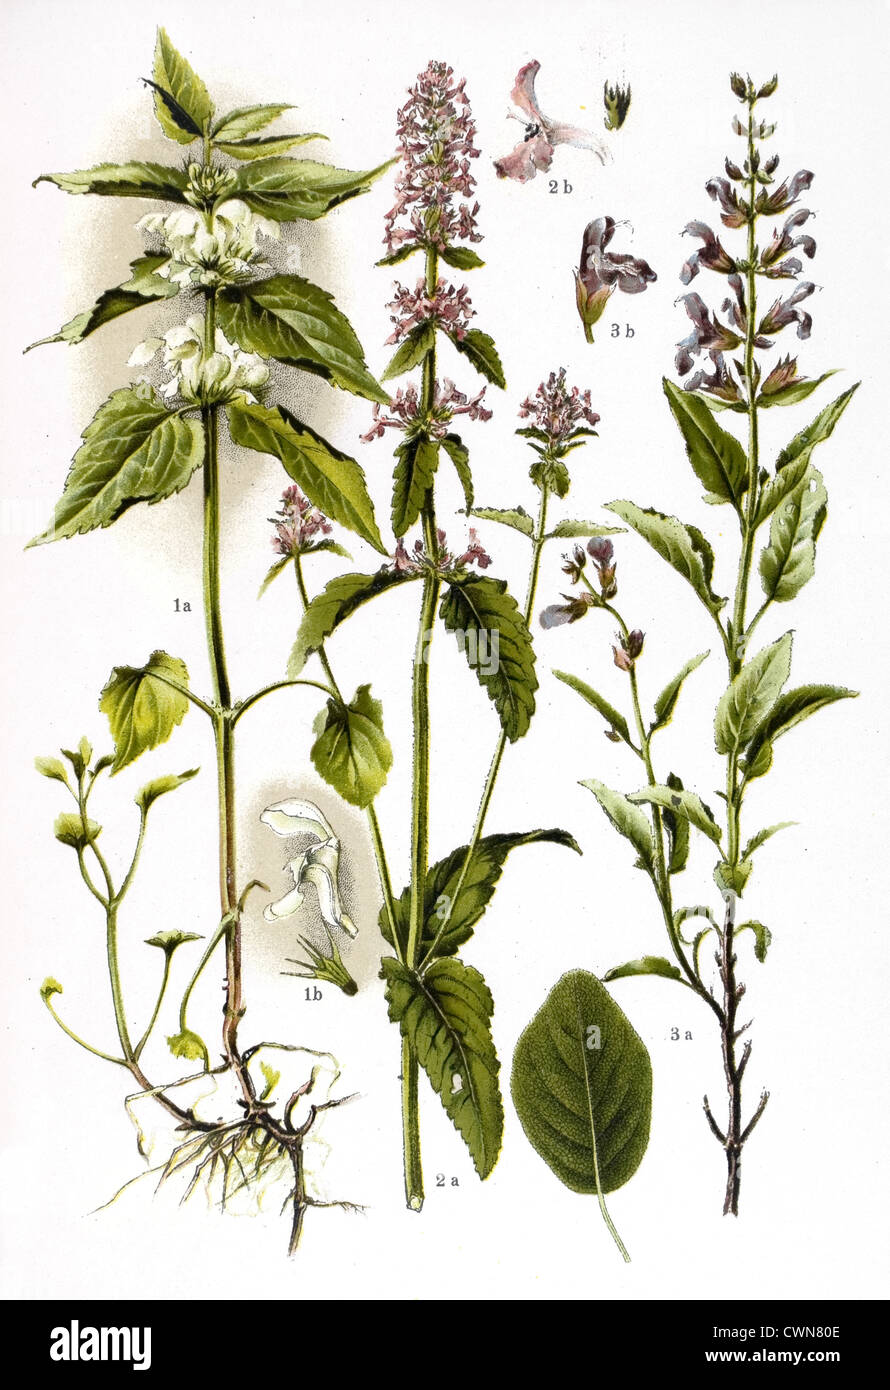 White Dead Nettle and other herbs Stock Photo